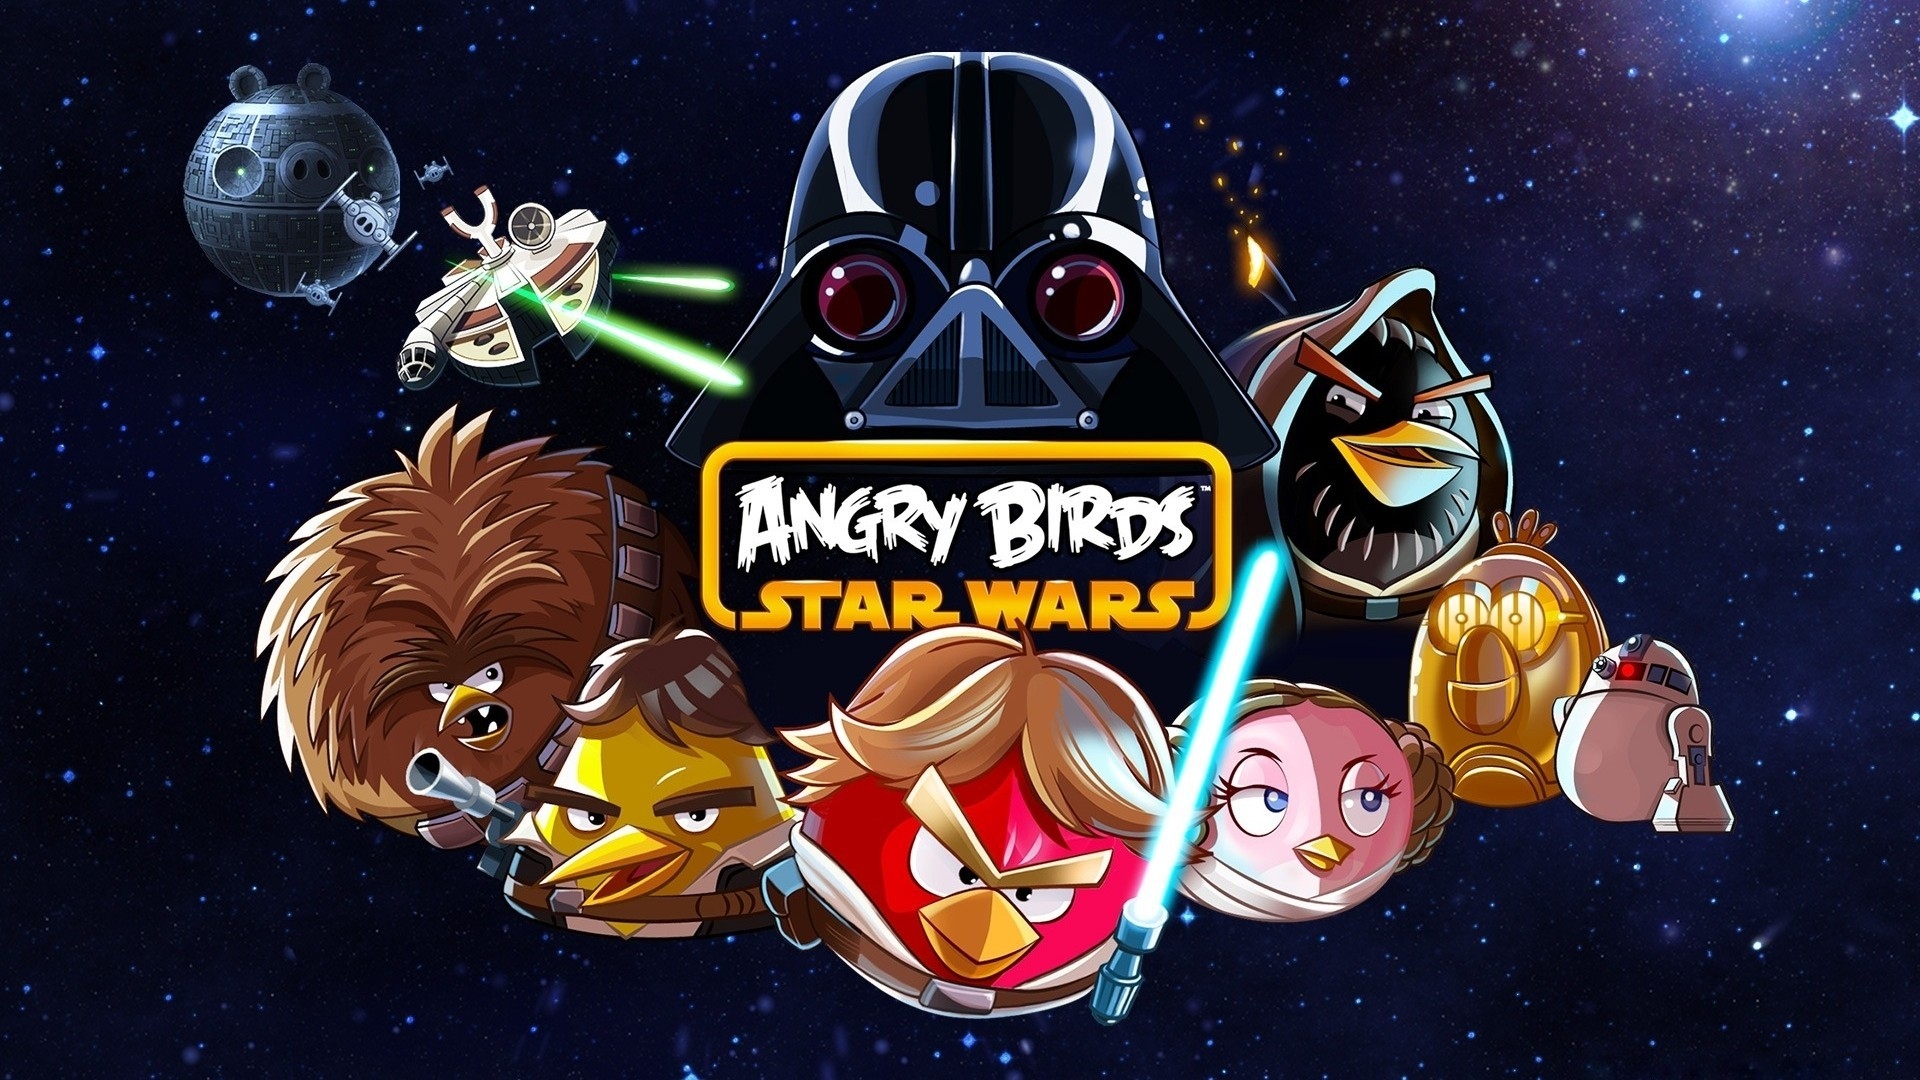 Angry Birds Star Wars for 1920 x 1080 HDTV 1080p resolution